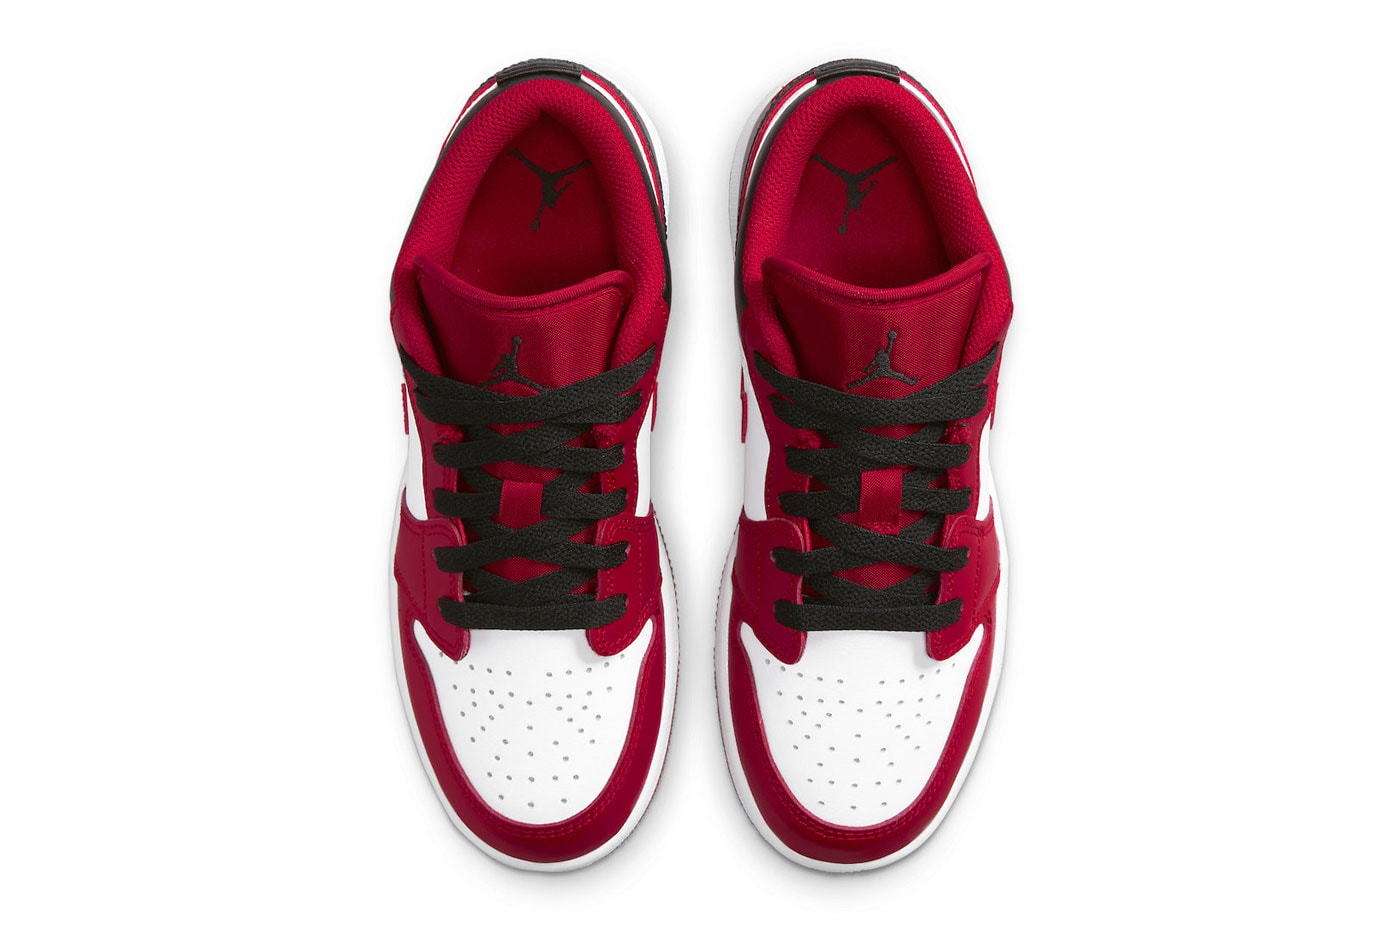 The Air Jordan 1 Low Is Dropping in Another Iteration of the Chicago Bulls Colorway nike jordan brand nba michael jordan white and red 553560-163